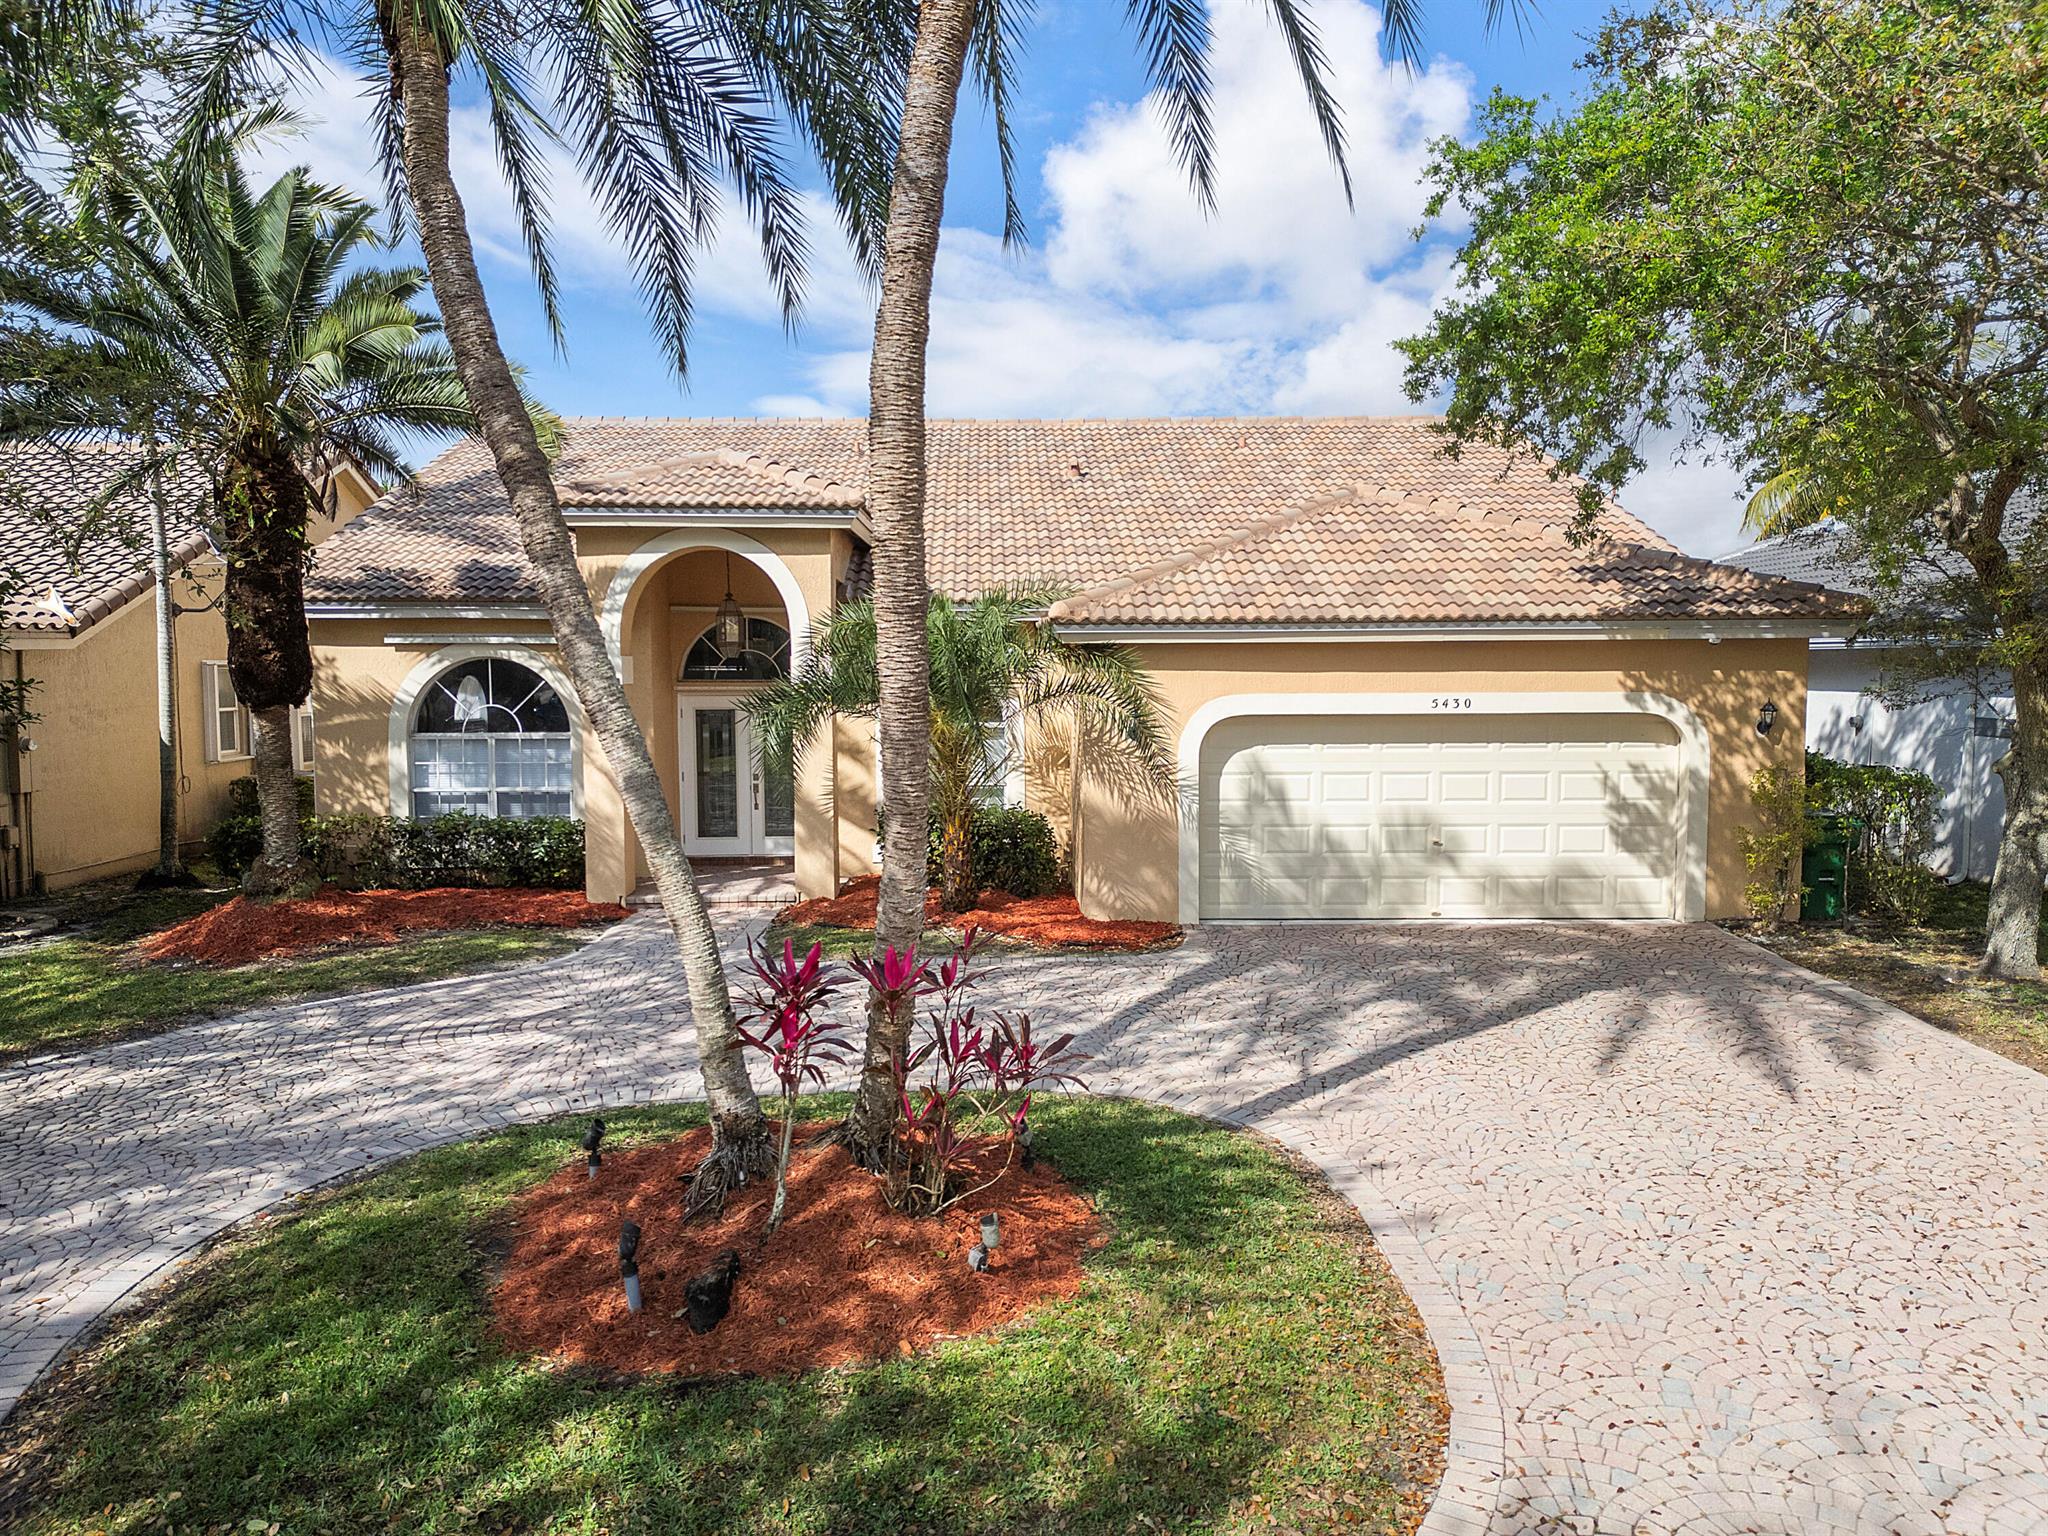 Stunning 4 bedroom Oasis with Lake Views & Modern Updates in Coral Springs, FL. This property offers renovated kitchen and bathrooms, breathtaking lake views, screened patio, and a generator that powers the entire home. This home also features new flooring throughout and was recently painted, as well the roof & AC was updated in 2018.